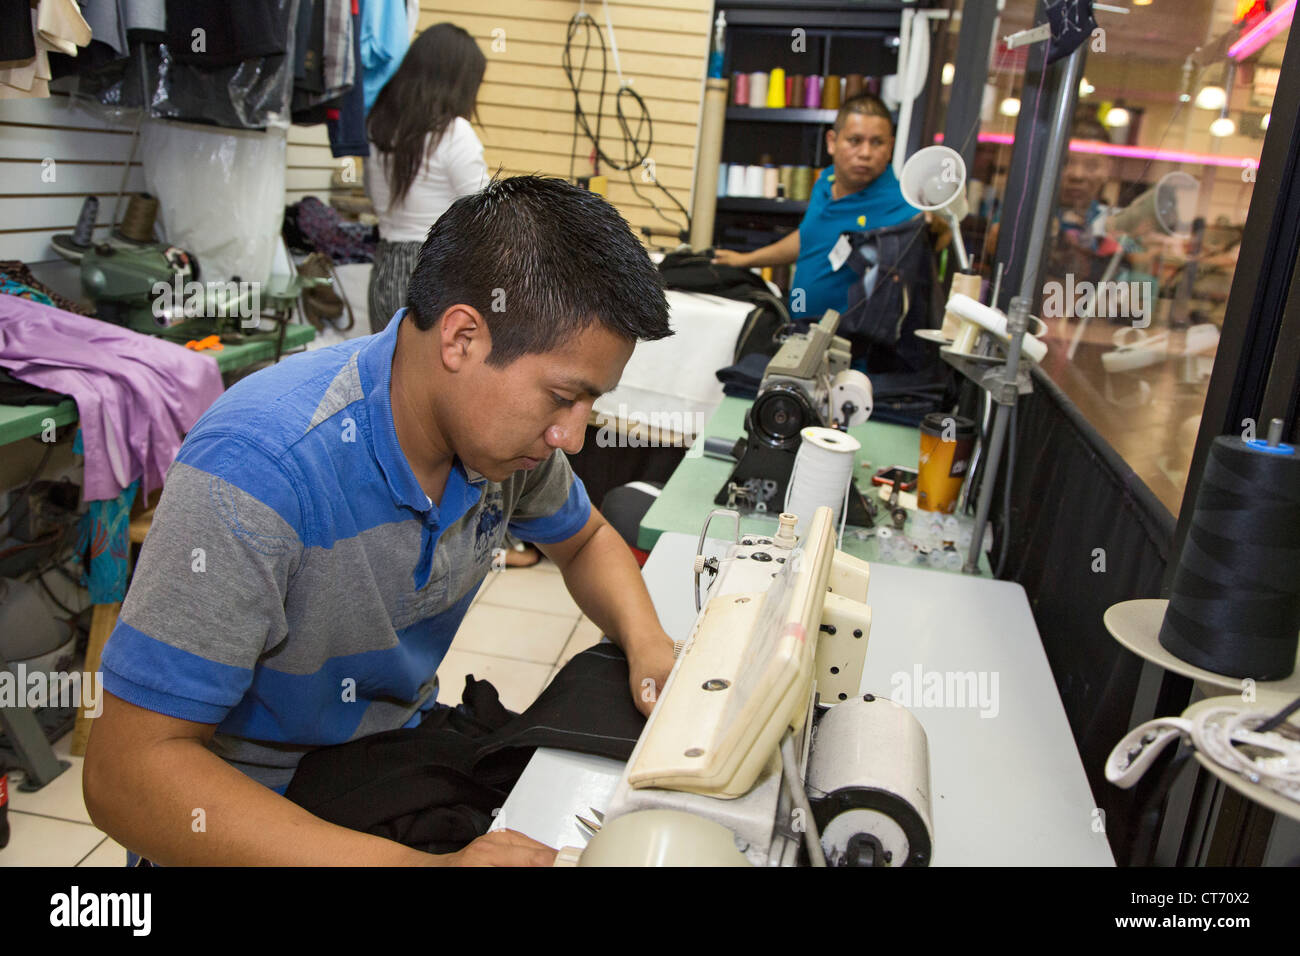 Los Angeles, California - A man sews clothing at a tailor shop in the Los Angeles Fasion District. Stock Photo